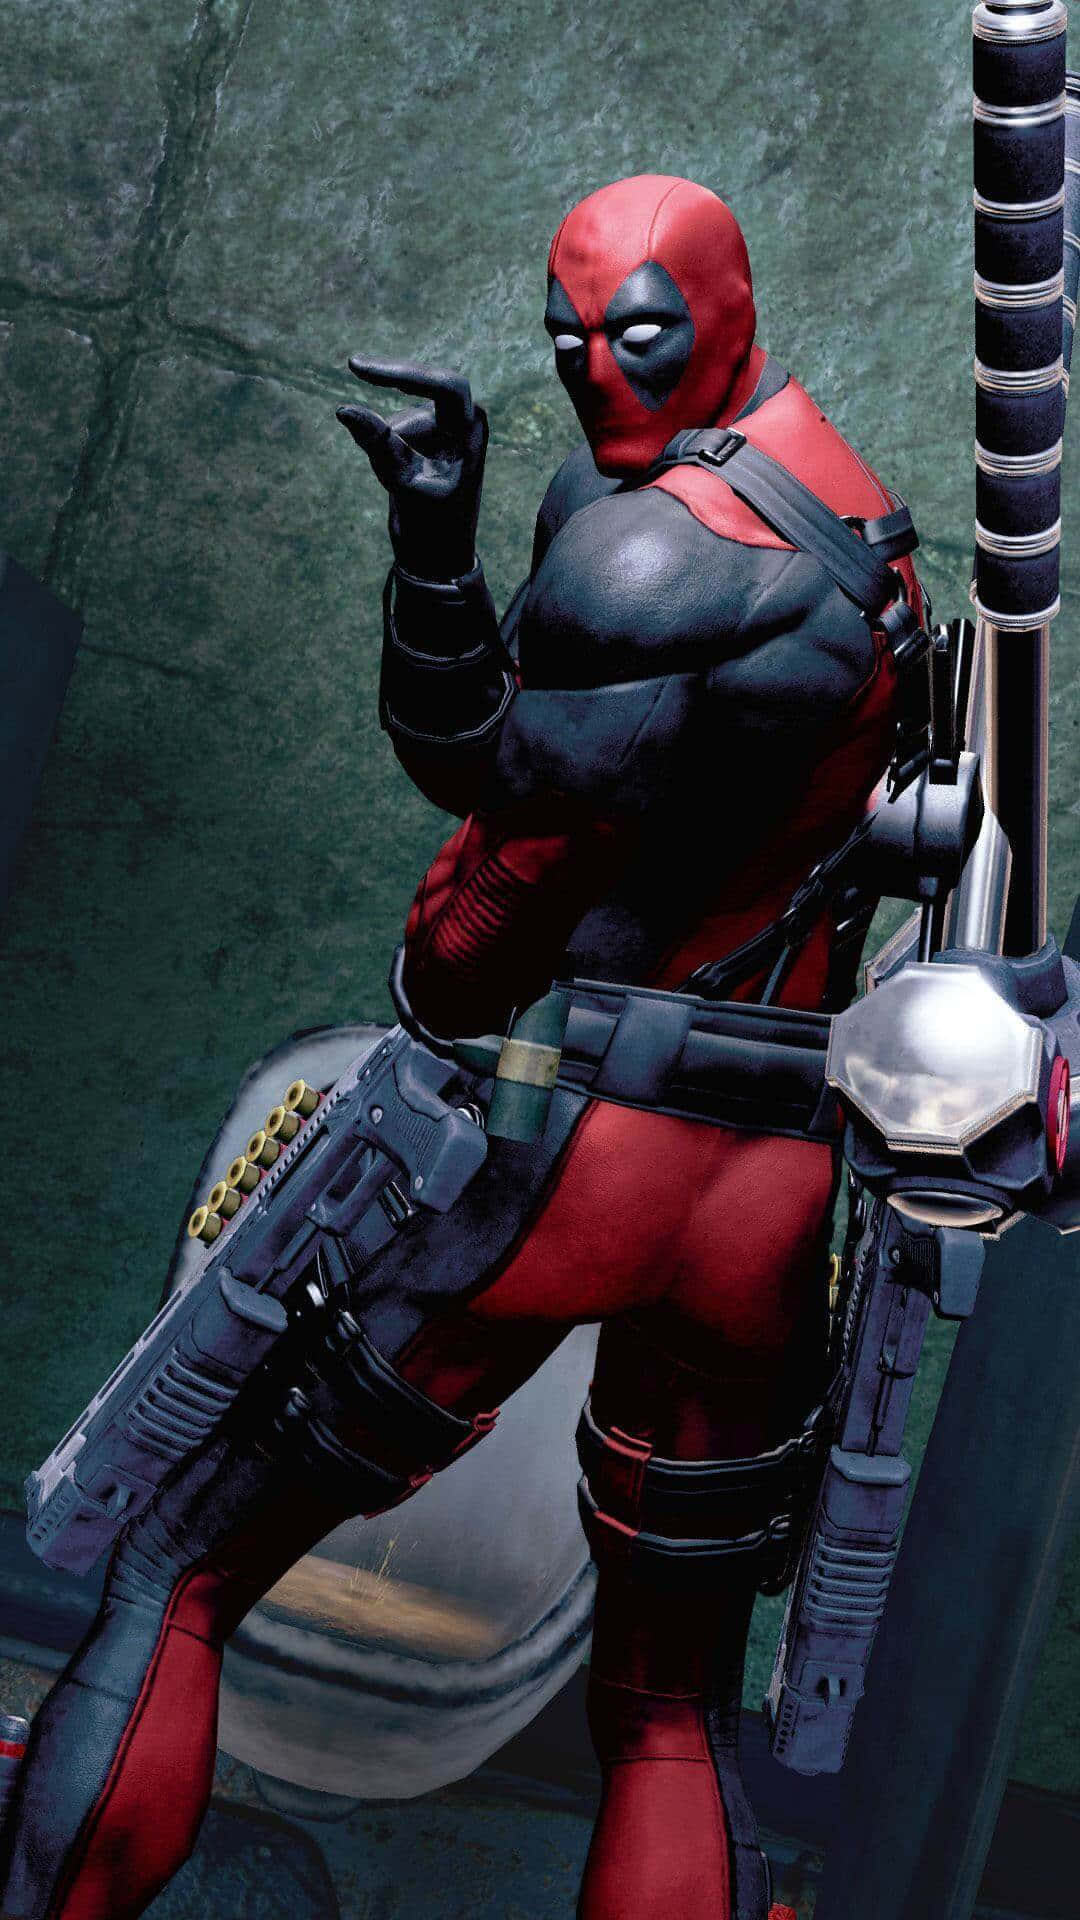 2932x2932 Deadpool 2 Movie 2018 8K Ipad Pro Retina Display ,HD 4k  Wallpapers,Images,Backgrounds,Photos and Pictures